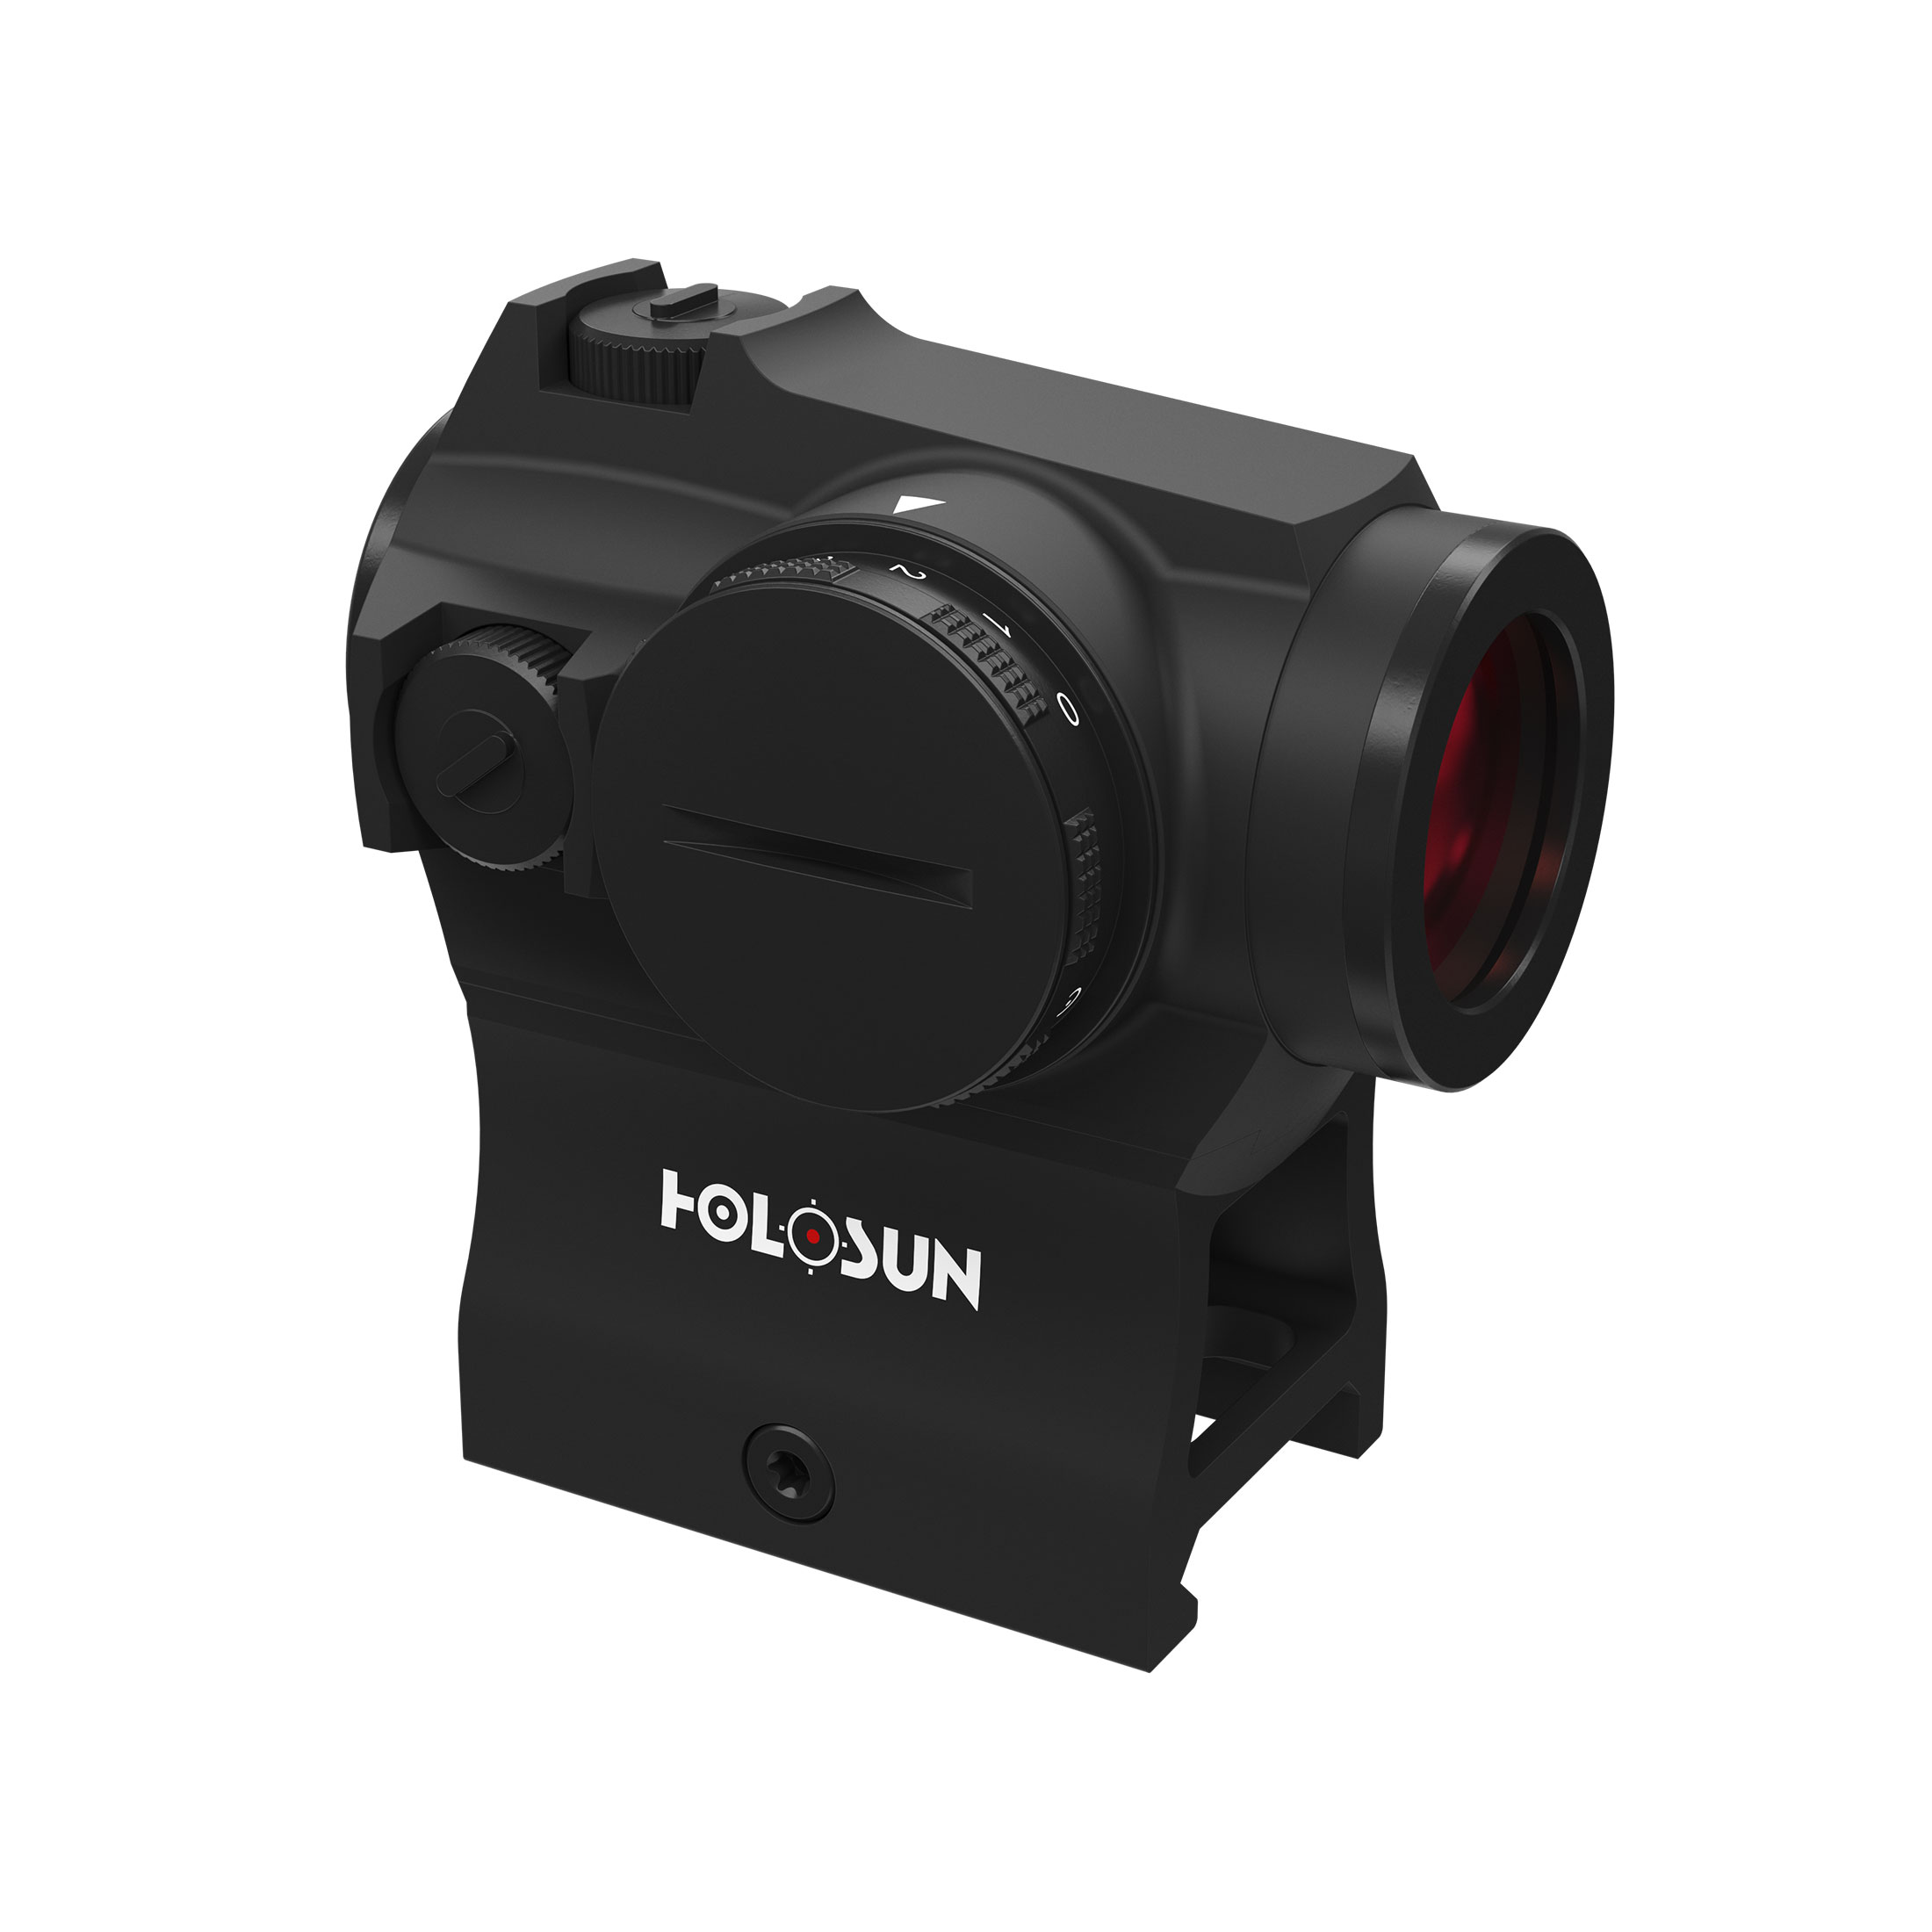 Holosun ELITE HE403R-GR Microdot green dot sight with 2MOA dot reticle, new rheostat dial to adjust…